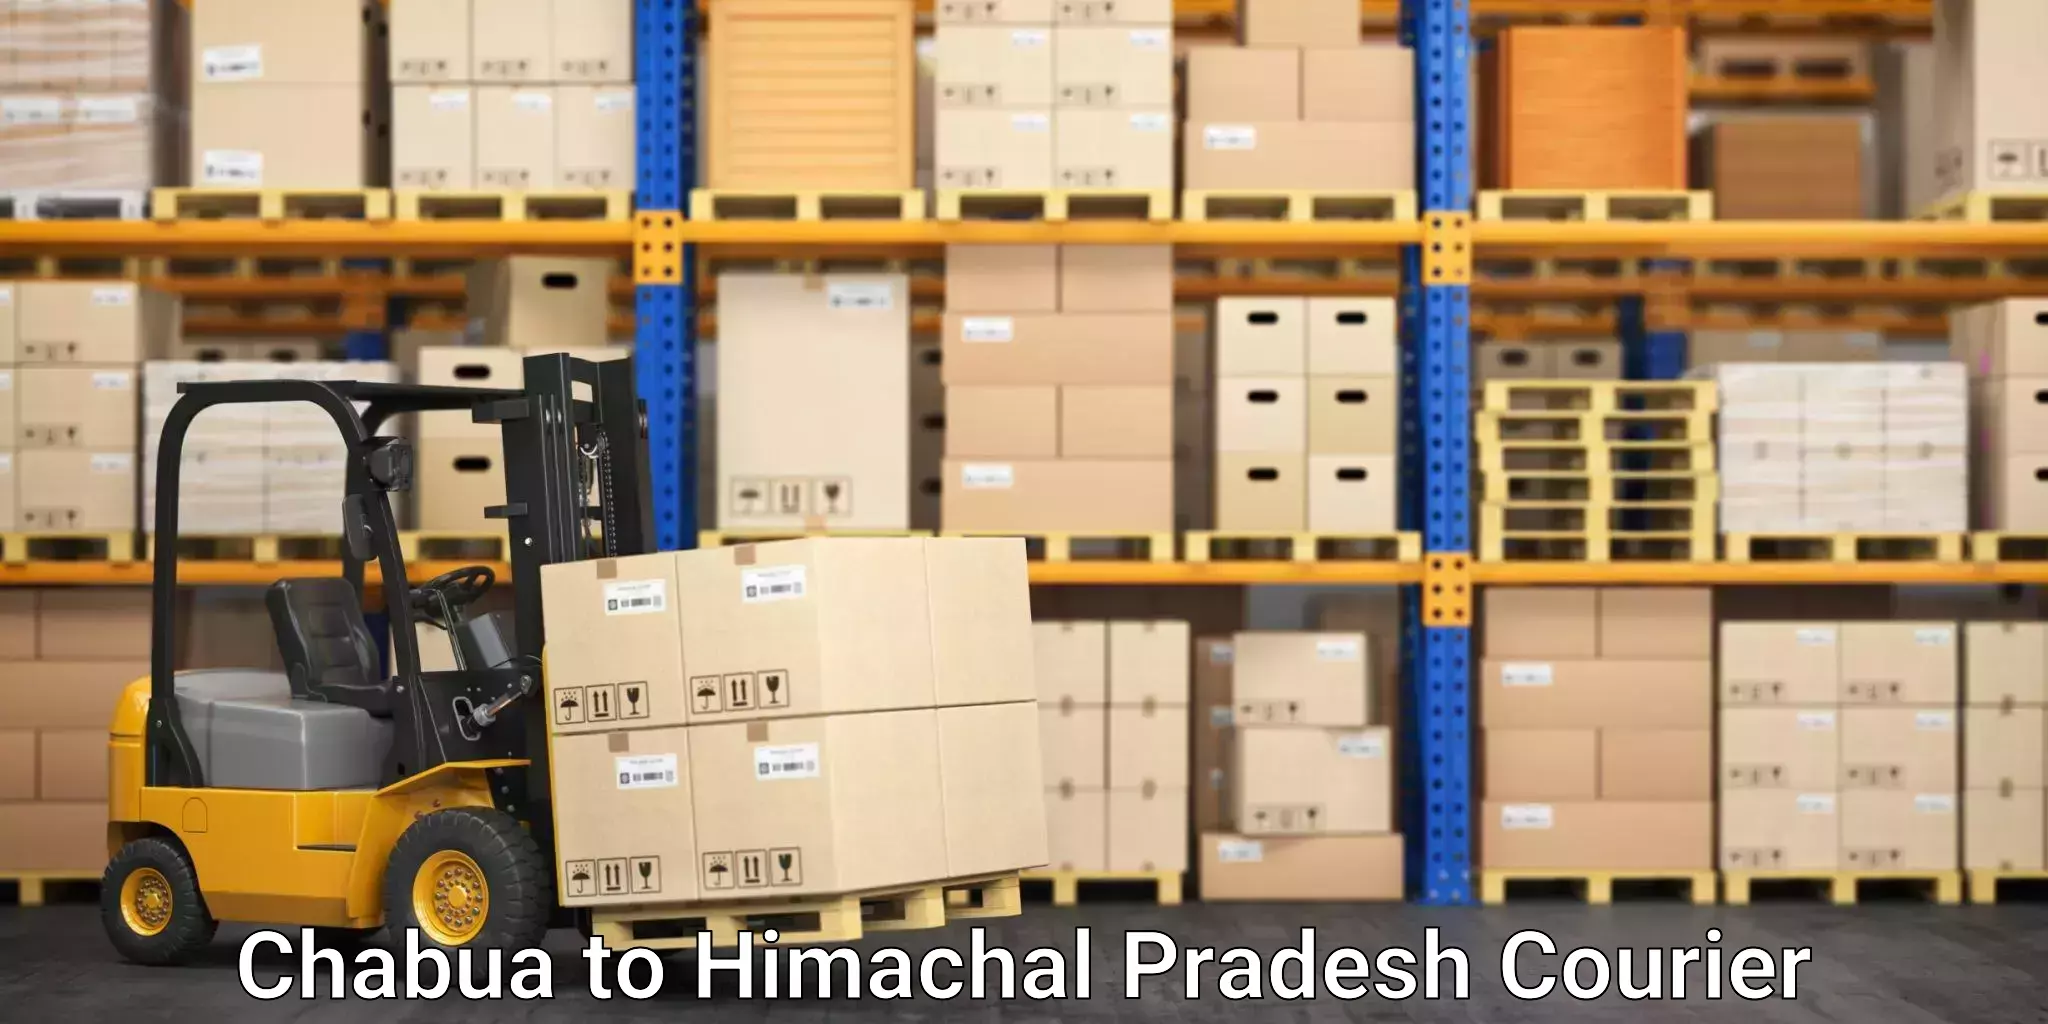 Flexible delivery schedules Chabua to Himachal Pradesh